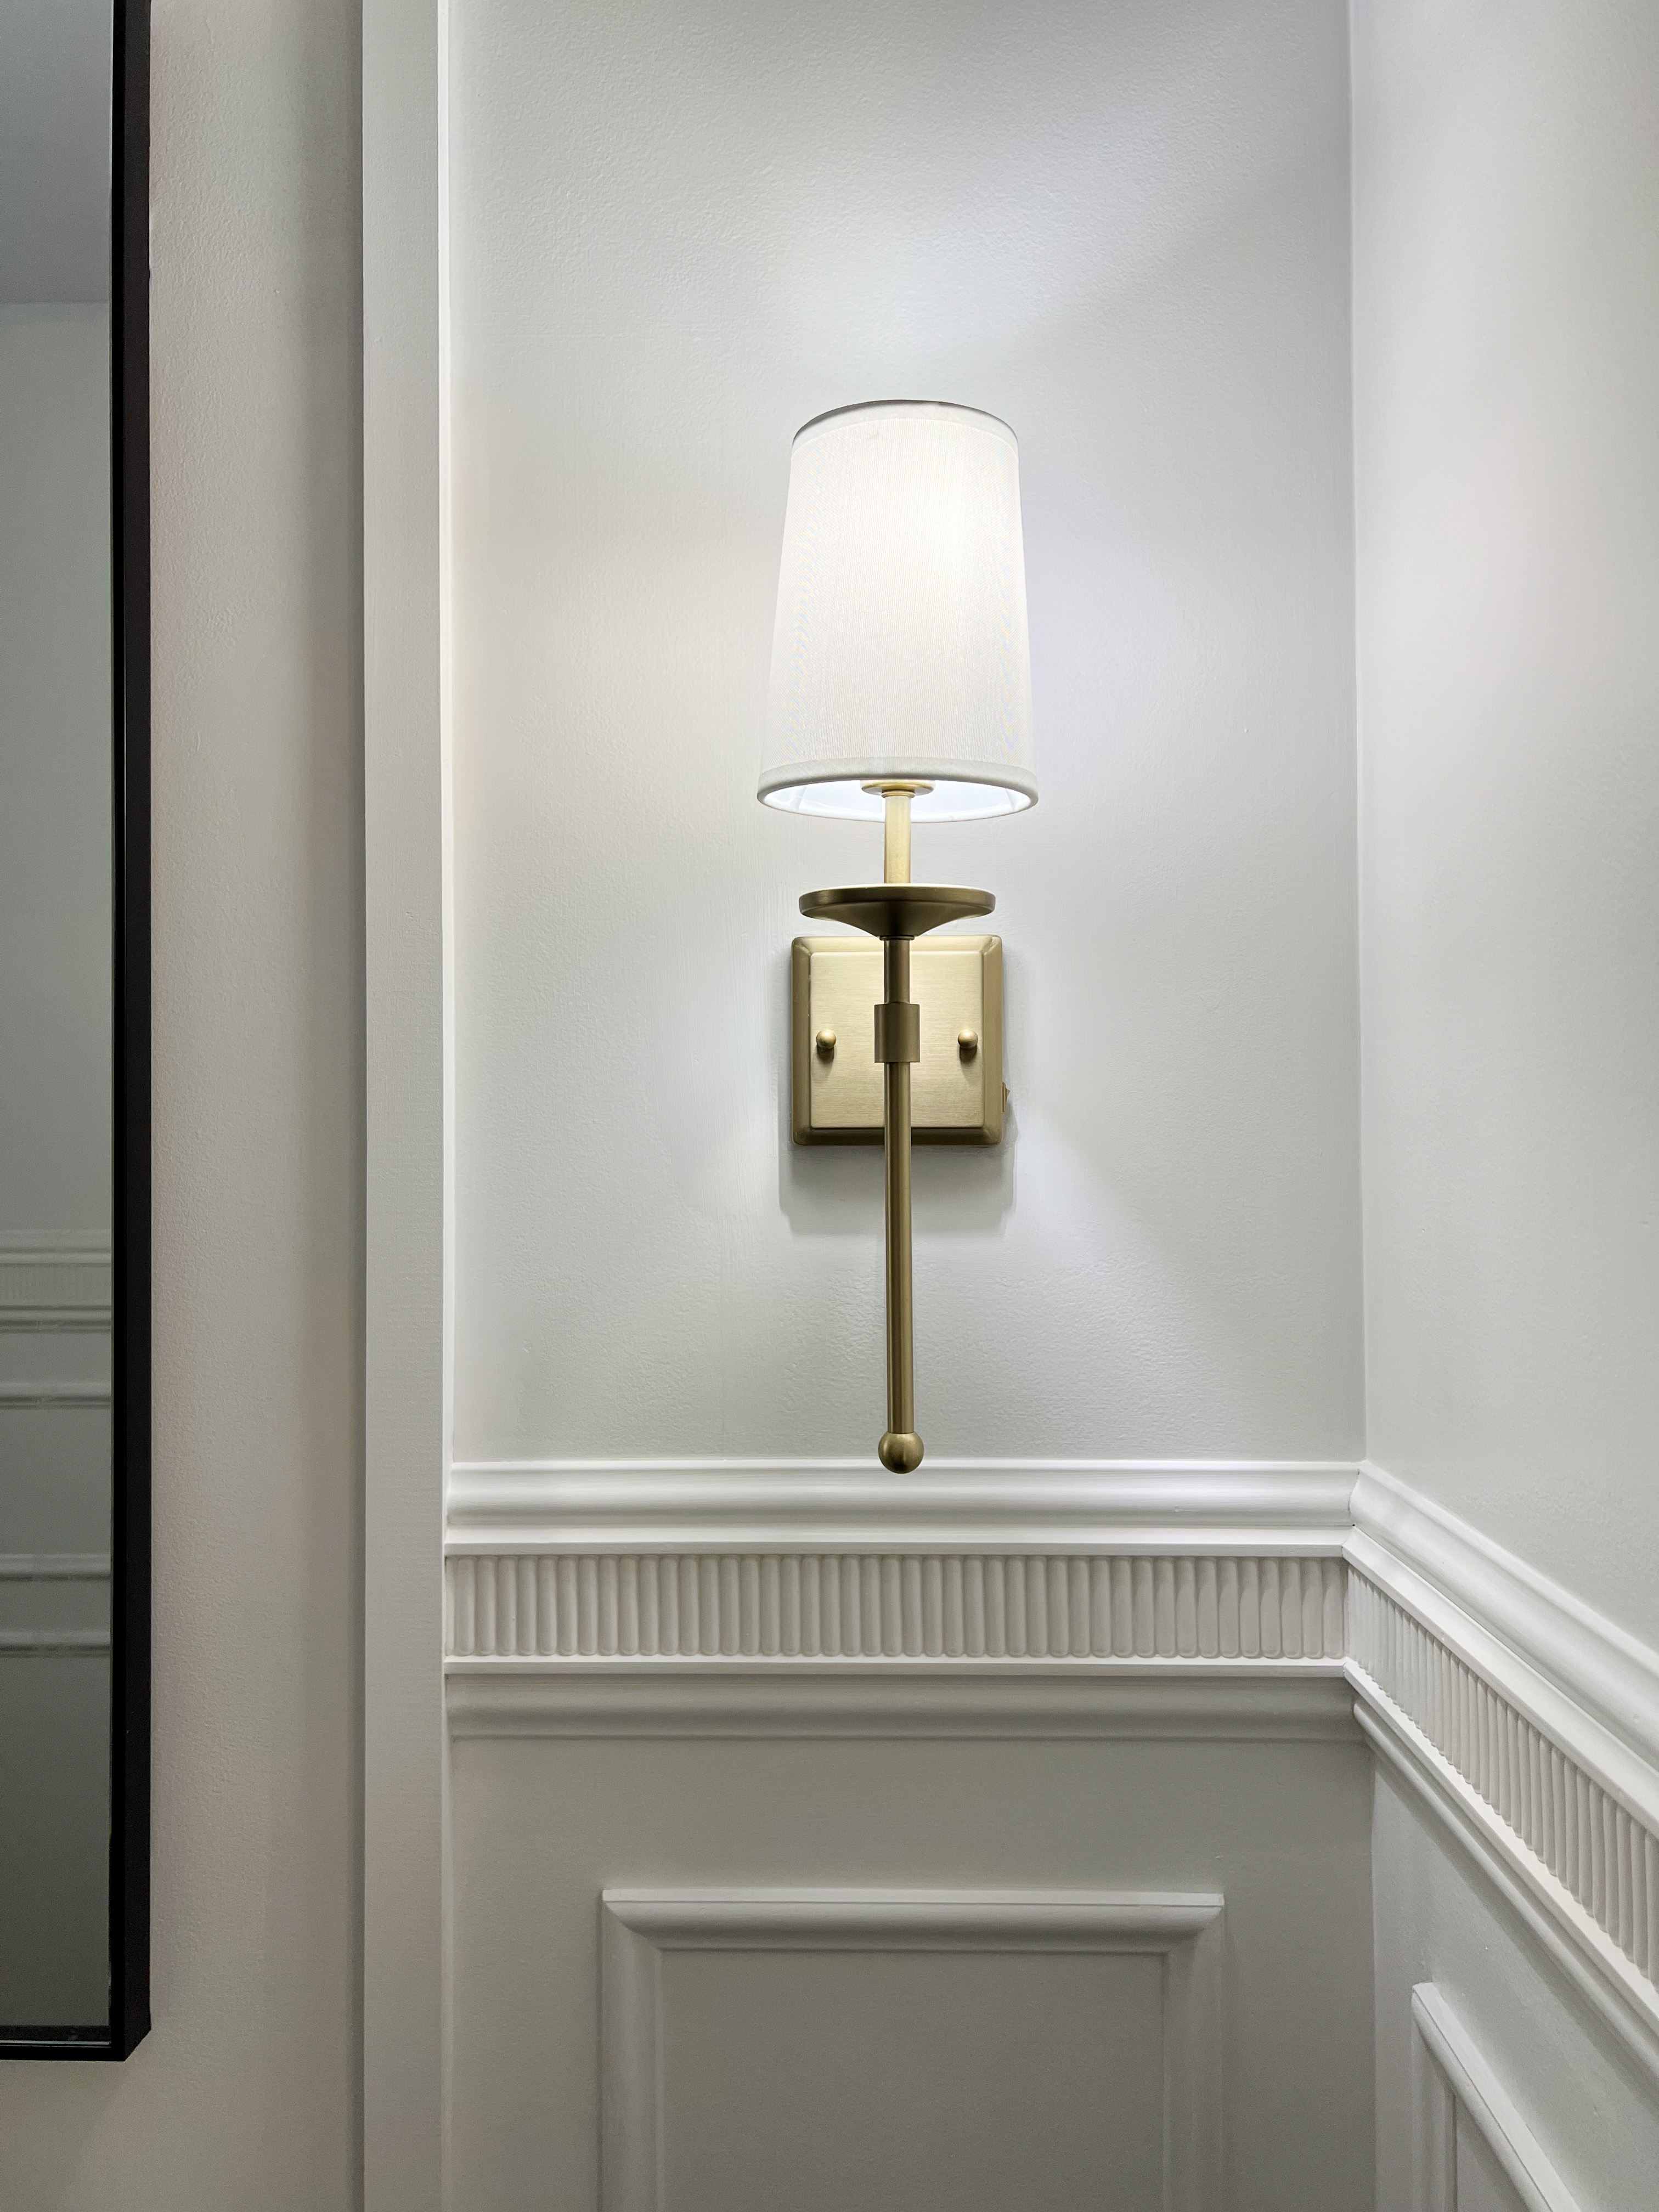 Brass light sconce on bathroom wall above ornate wall trim.